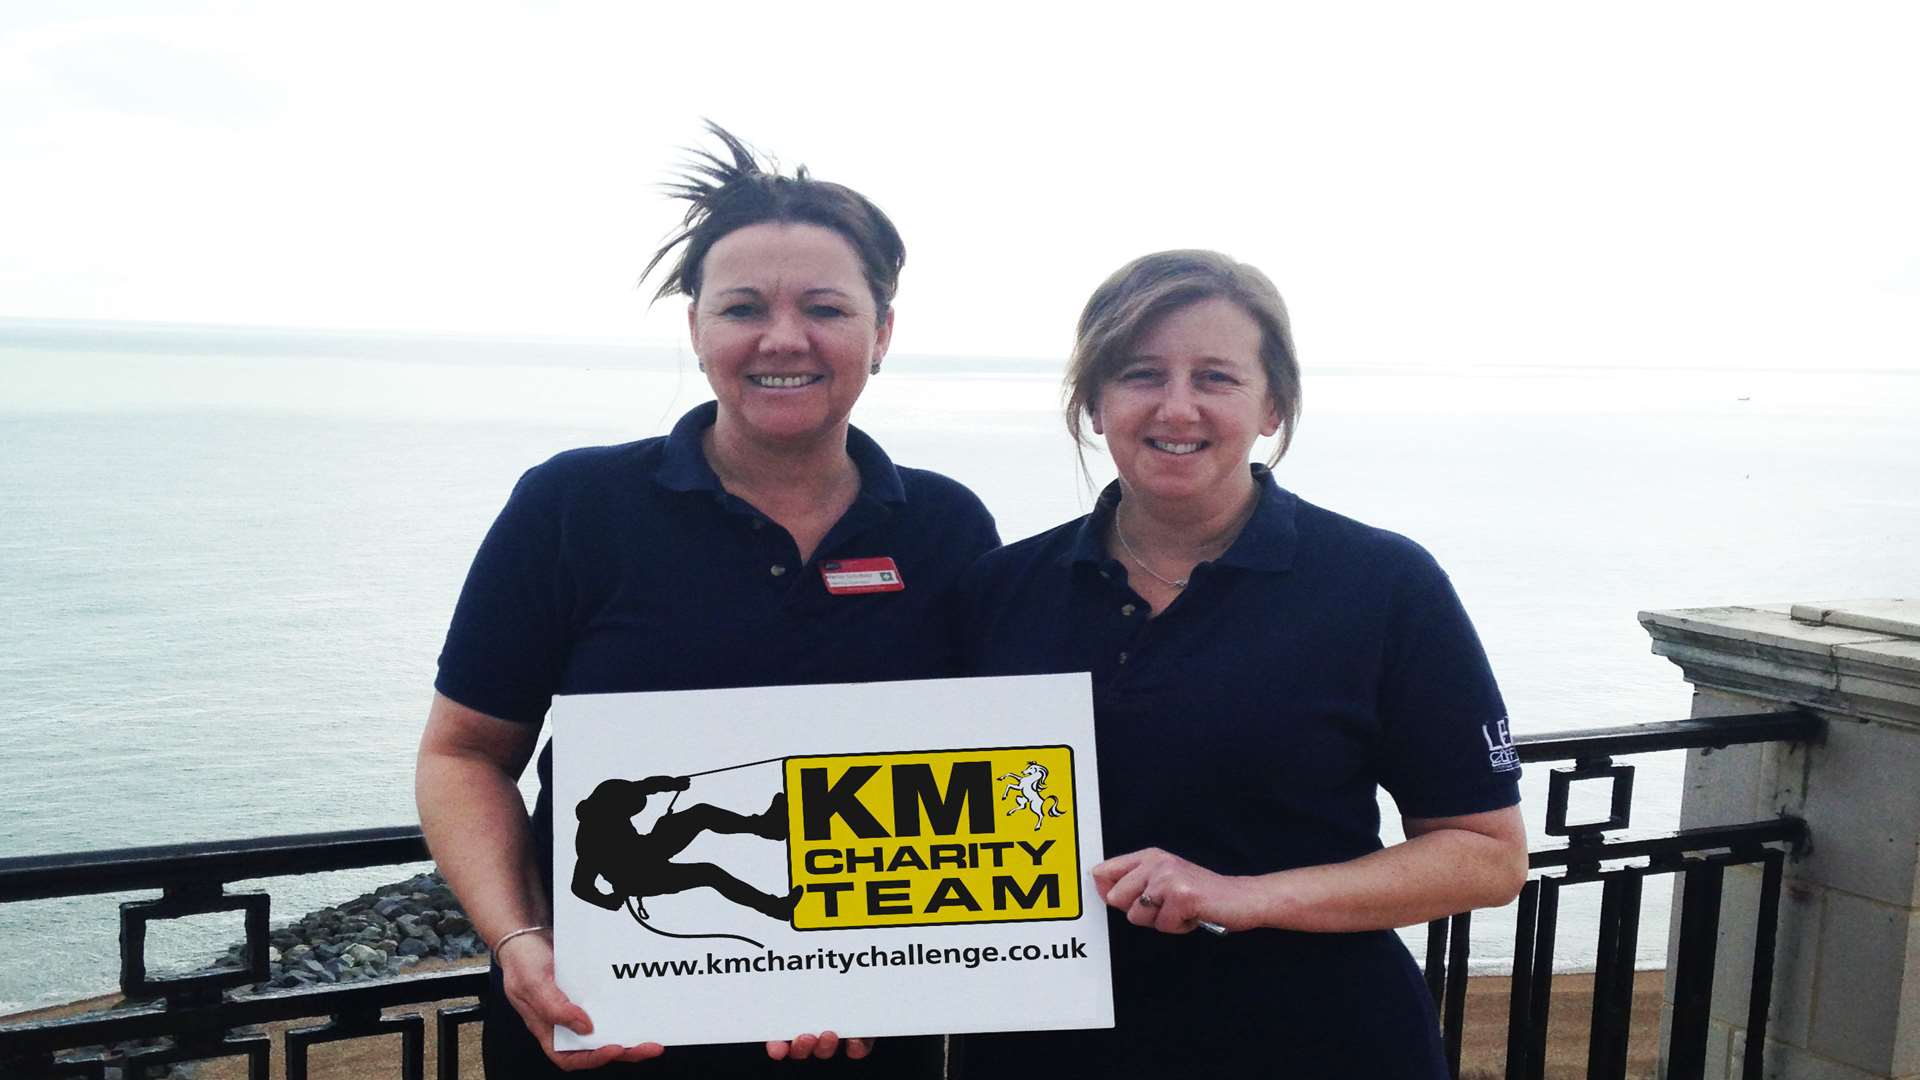 Mandy Schofield and Sam Ovenden of Leas Cliff Hall will be beating the drop at the KM summer abseil on June 14.